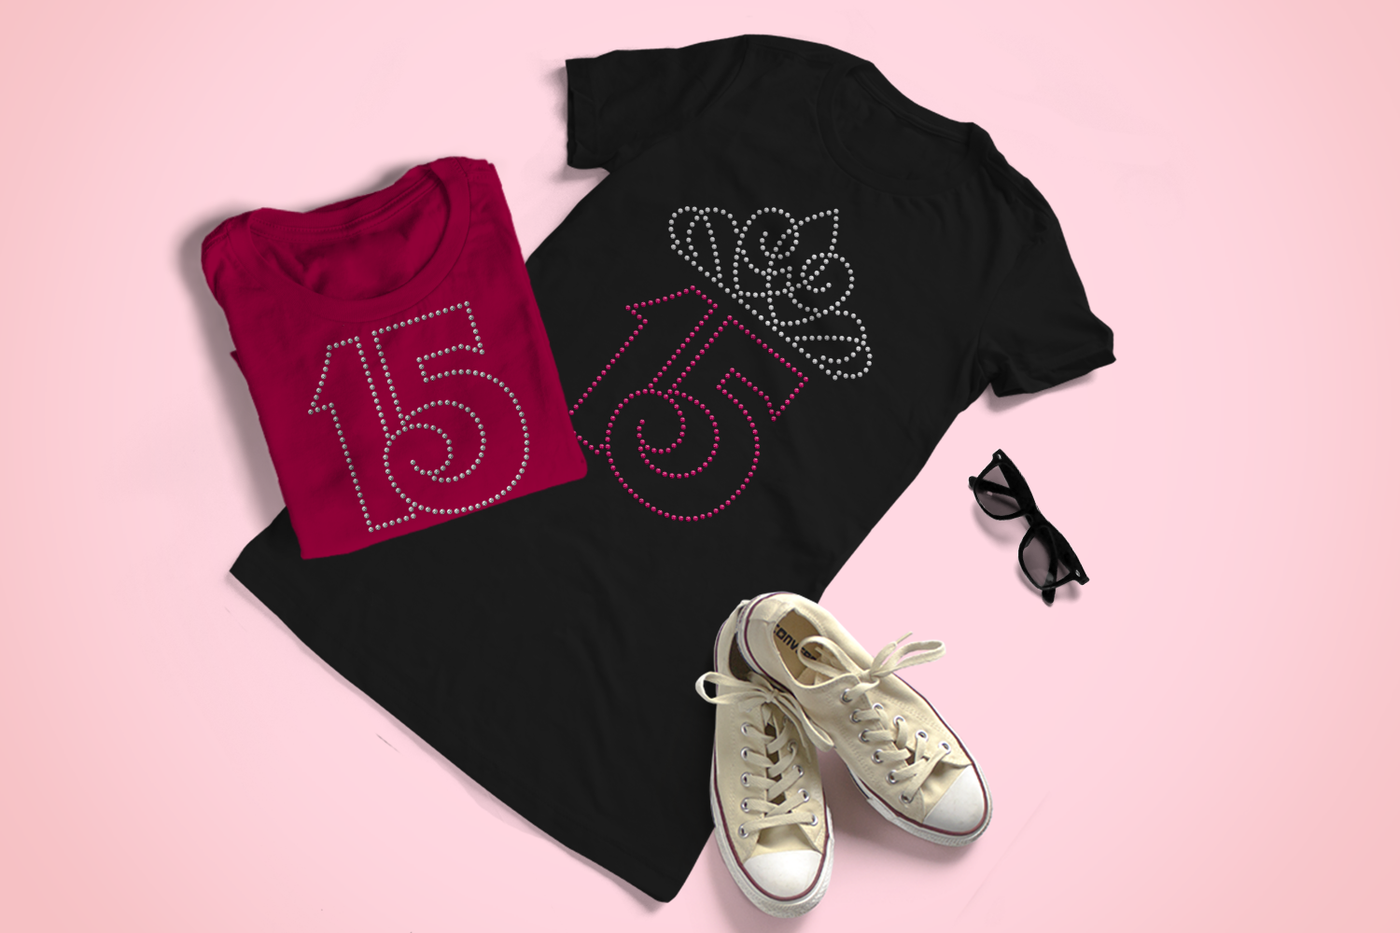 A black tee and a dark pink folded tee sit on a pale pink background, along with a pair of ivory Converse and sunglasses. The pink tee has a large number 15 in clear rhinestones. The black tee has the same 15 in hot pink rhinestones with a tiara in clear rhinestones above.